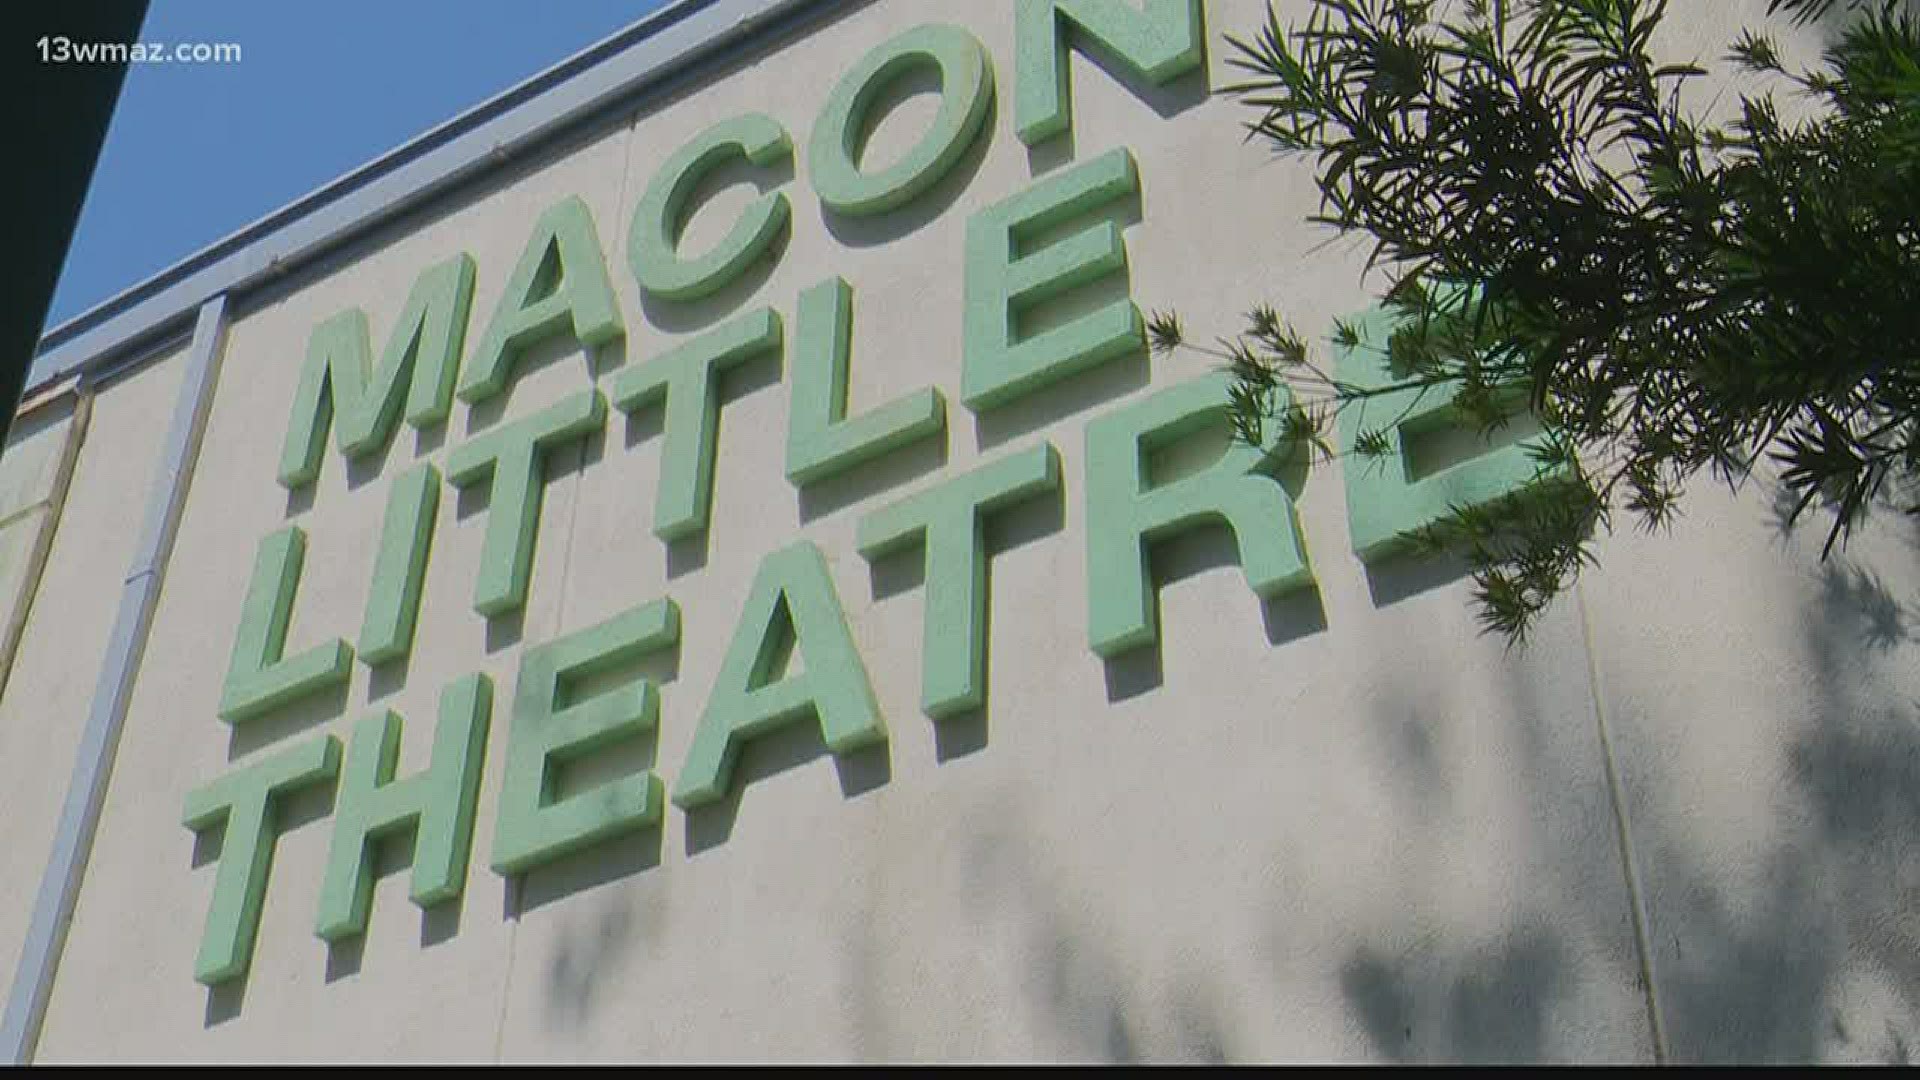 Macon Little Theatre says they've had to postpone one show, cancel another, and put the rest of their season on hold -- which has hurt them financially.